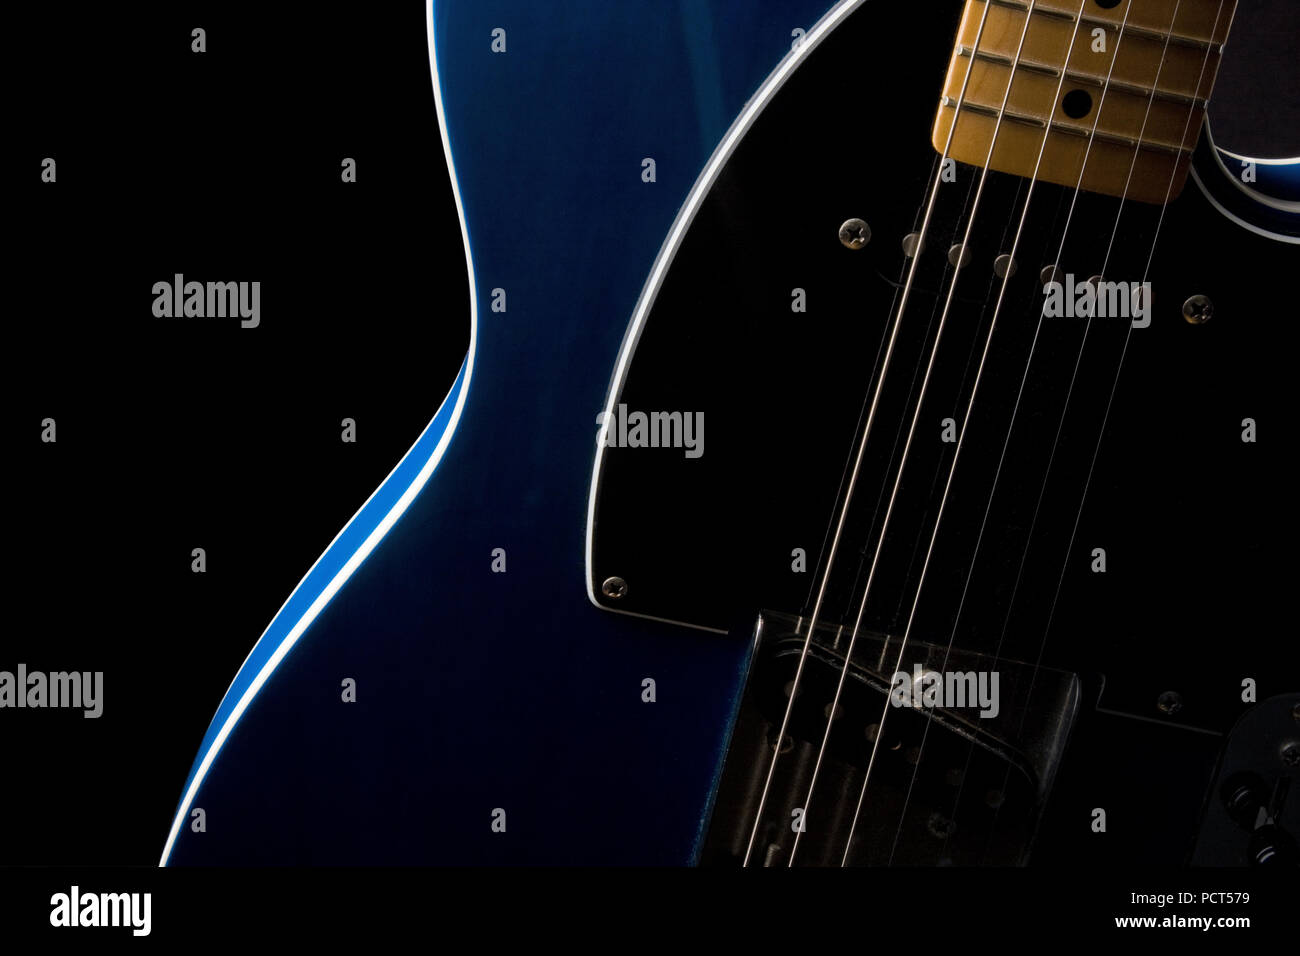 Section of an electric guitar body and neck in close-up with strong side light Stock Photo